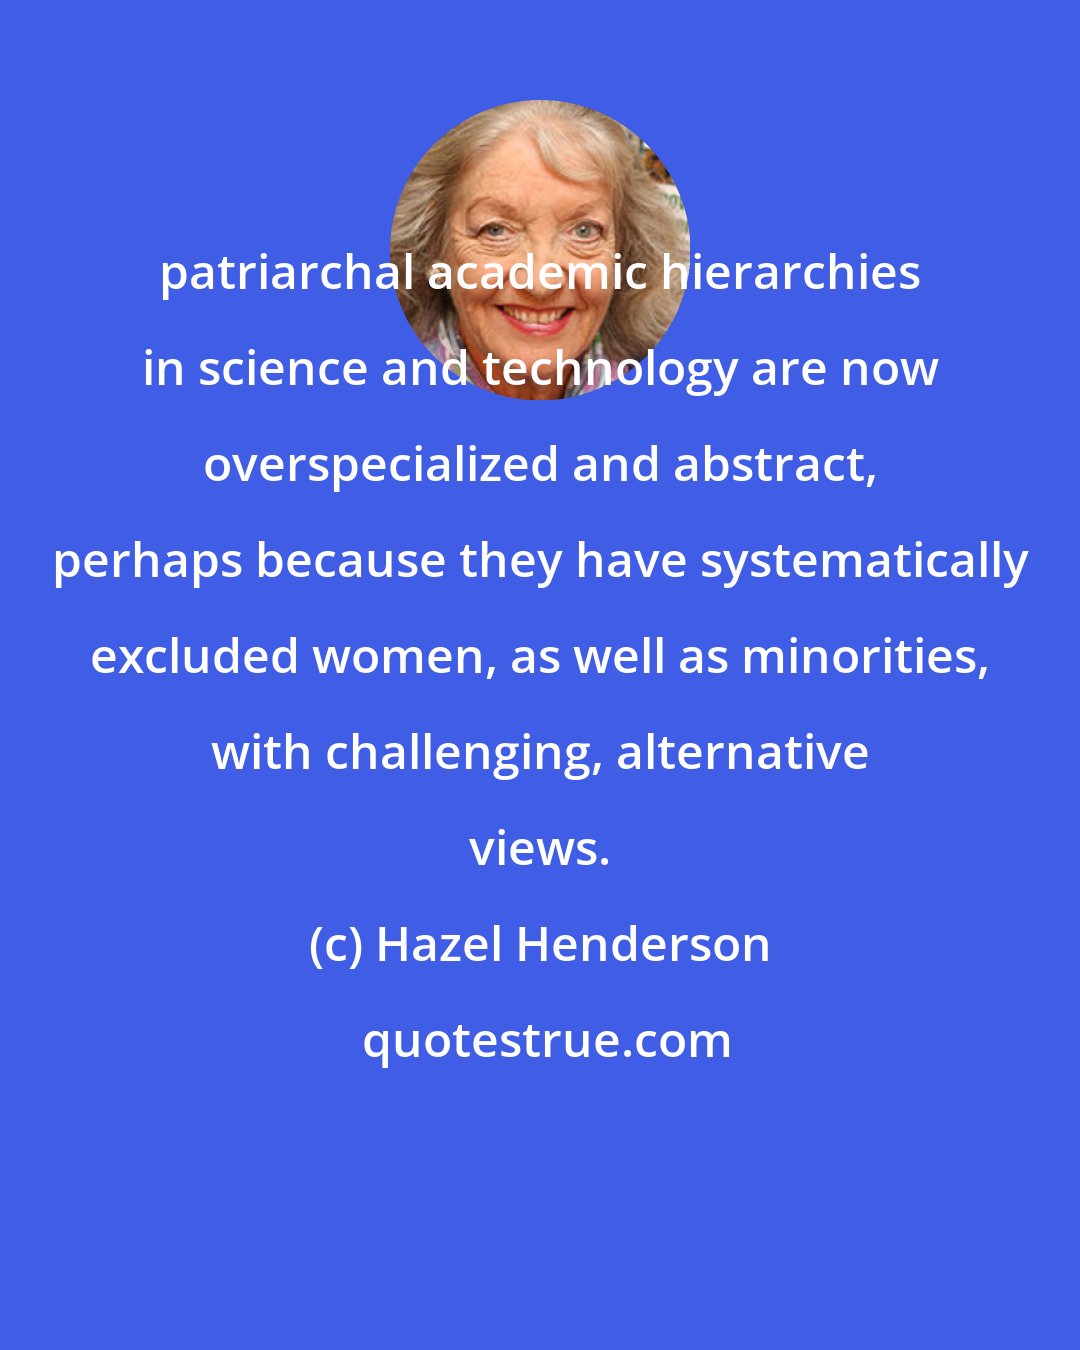 Hazel Henderson: patriarchal academic hierarchies in science and technology are now overspecialized and abstract, perhaps because they have systematically excluded women, as well as minorities, with challenging, alternative views.